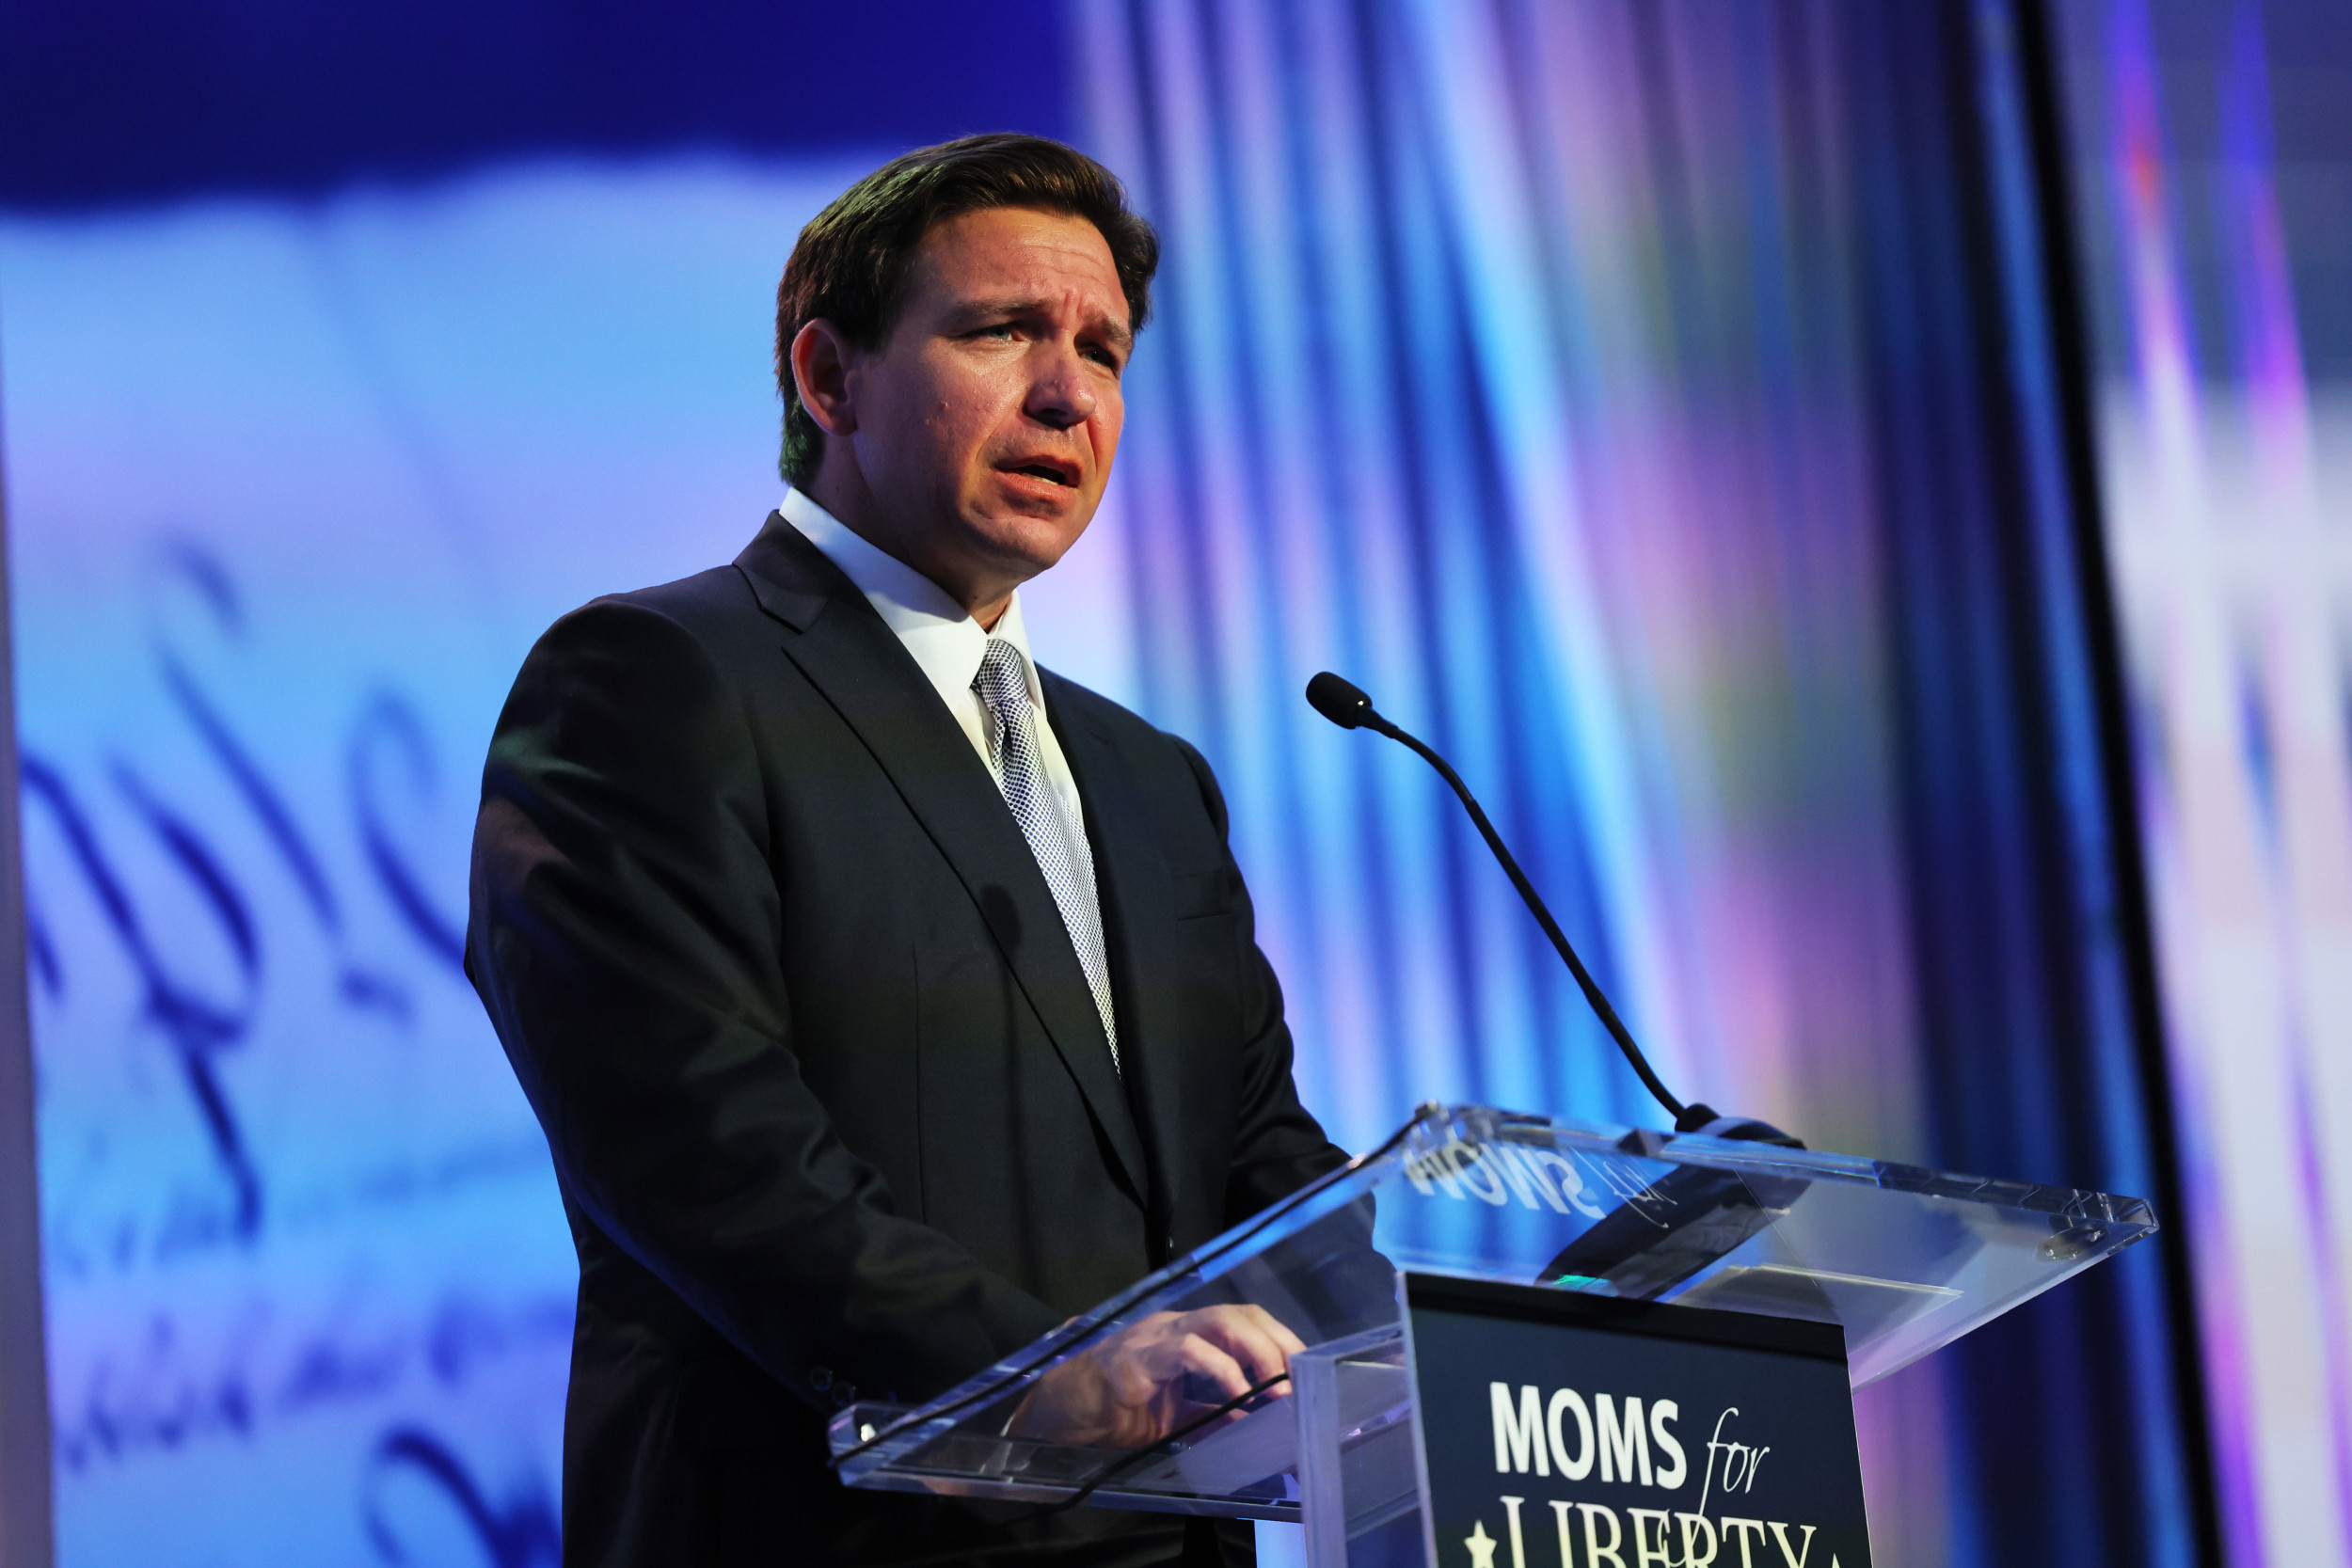 Video of Ron DeSantis saying “woke” six times in 19 seconds goes viral